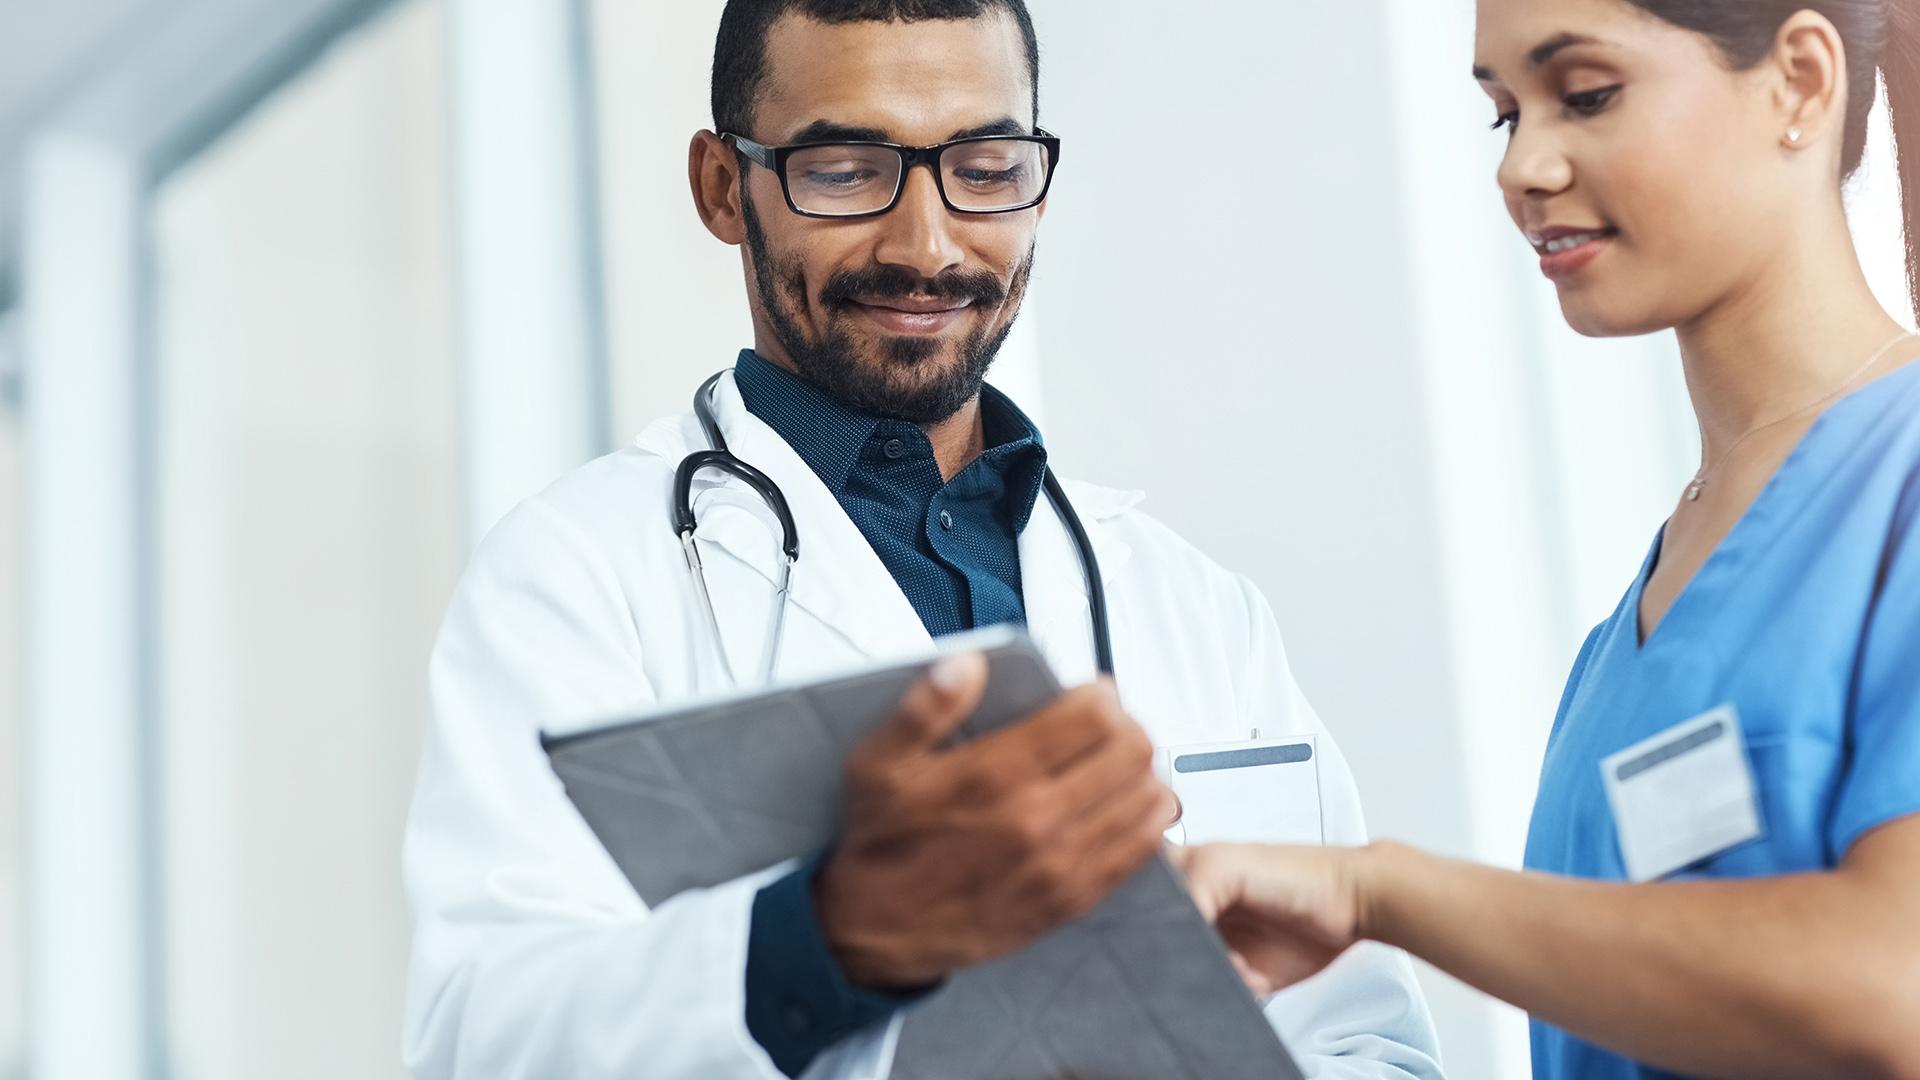 Successful doctors value the importance of teamwork